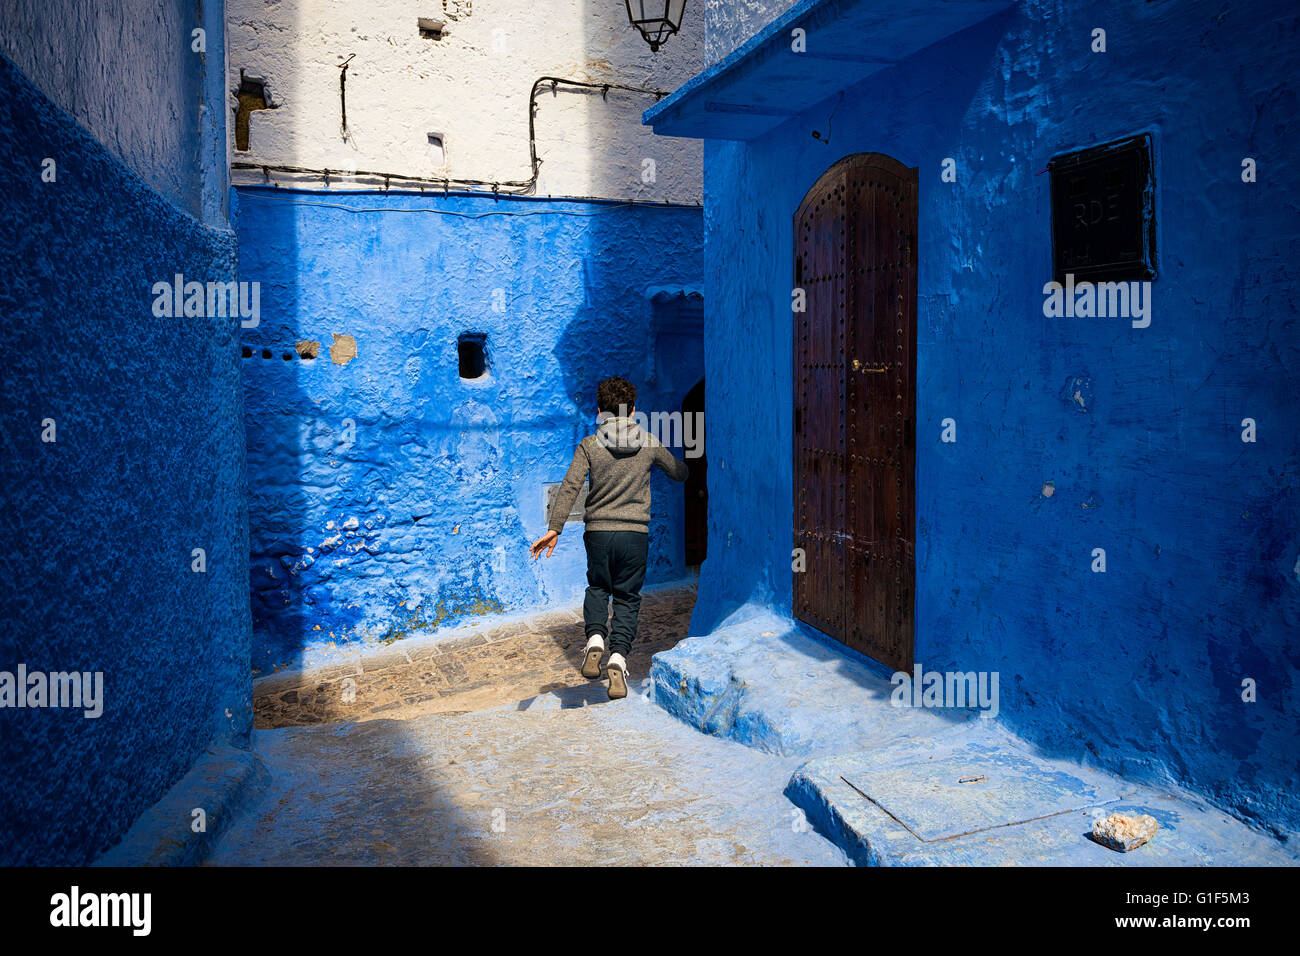 Chefchaouen, Morocco - April 10, 2016: A child running in a street of the town of Chefchaouen in Morocco. Stock Photo